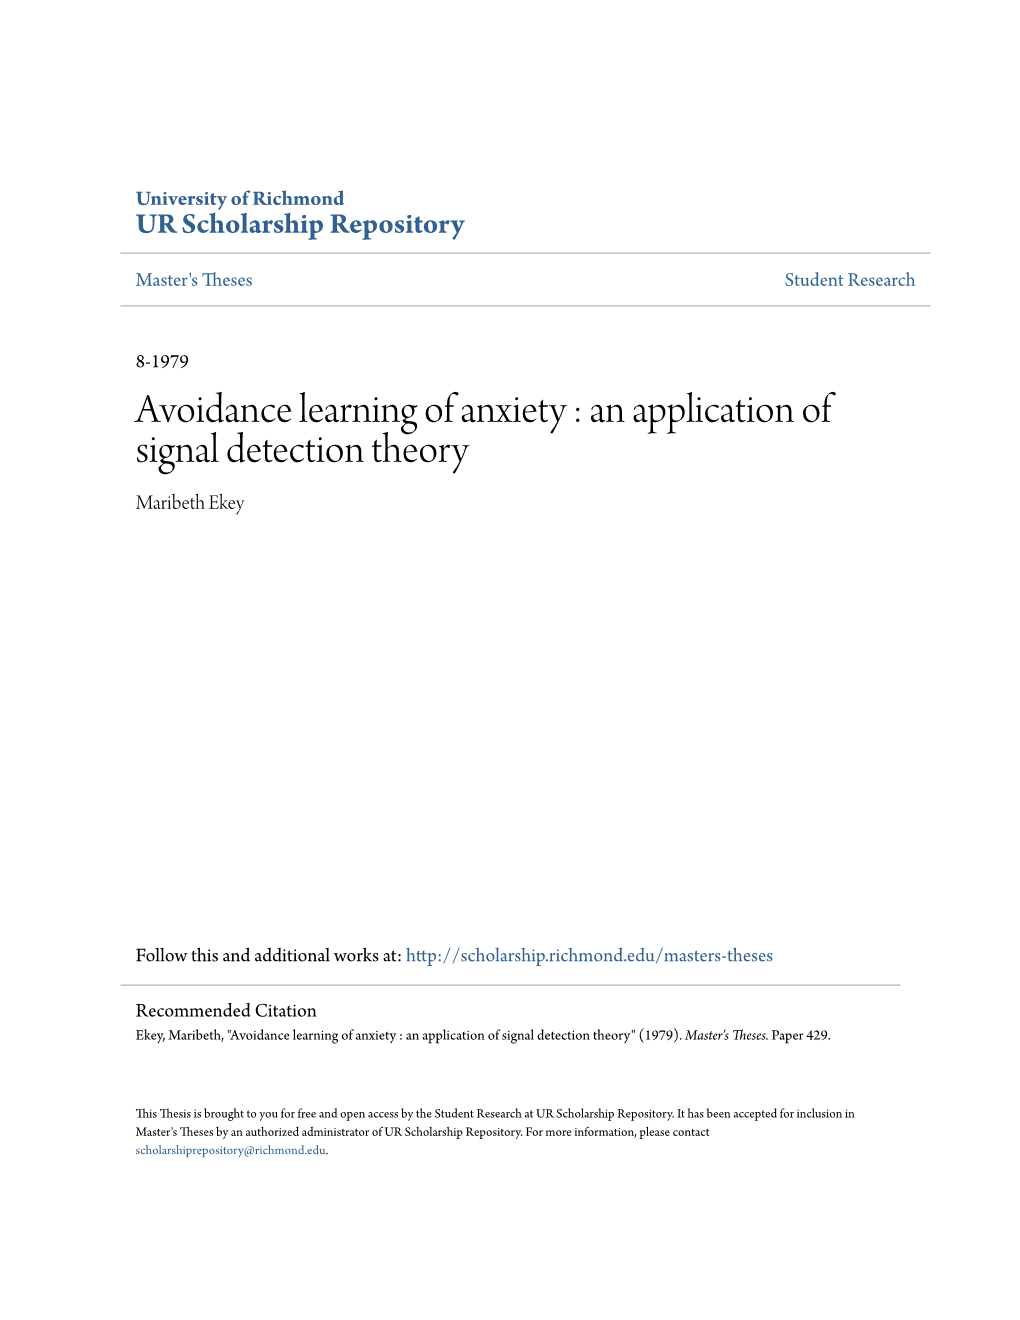 Avoidance Learning of Anxiety : an Application of Signal Detection Theory Maribeth Ekey